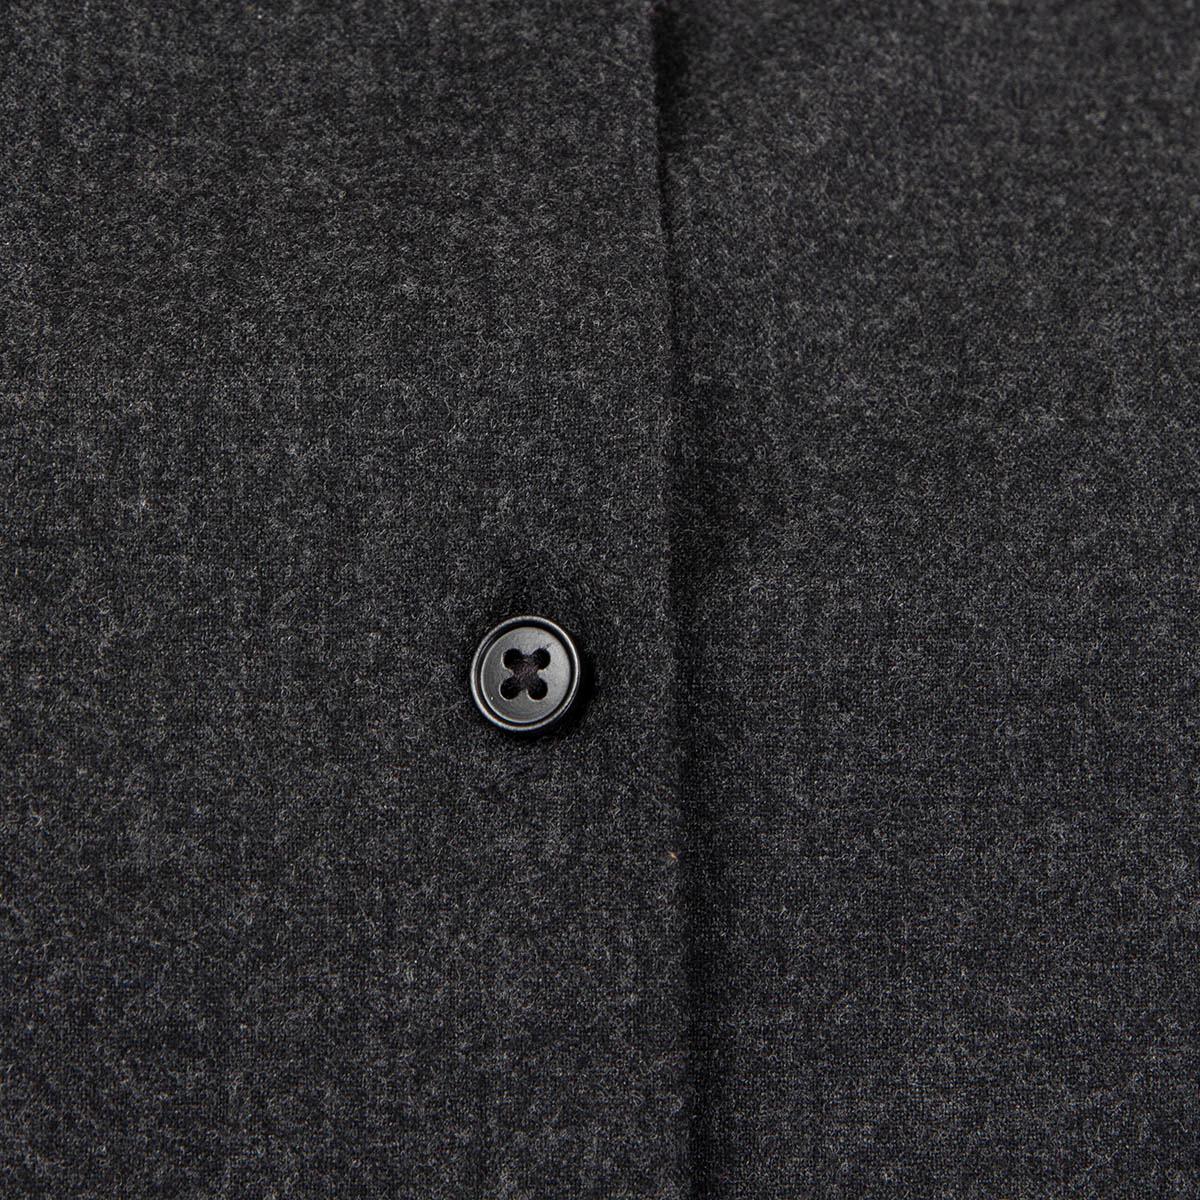 JIL SANDER anthracite grey mohair Button Up Shirt 38 M In Excellent Condition For Sale In Zürich, CH